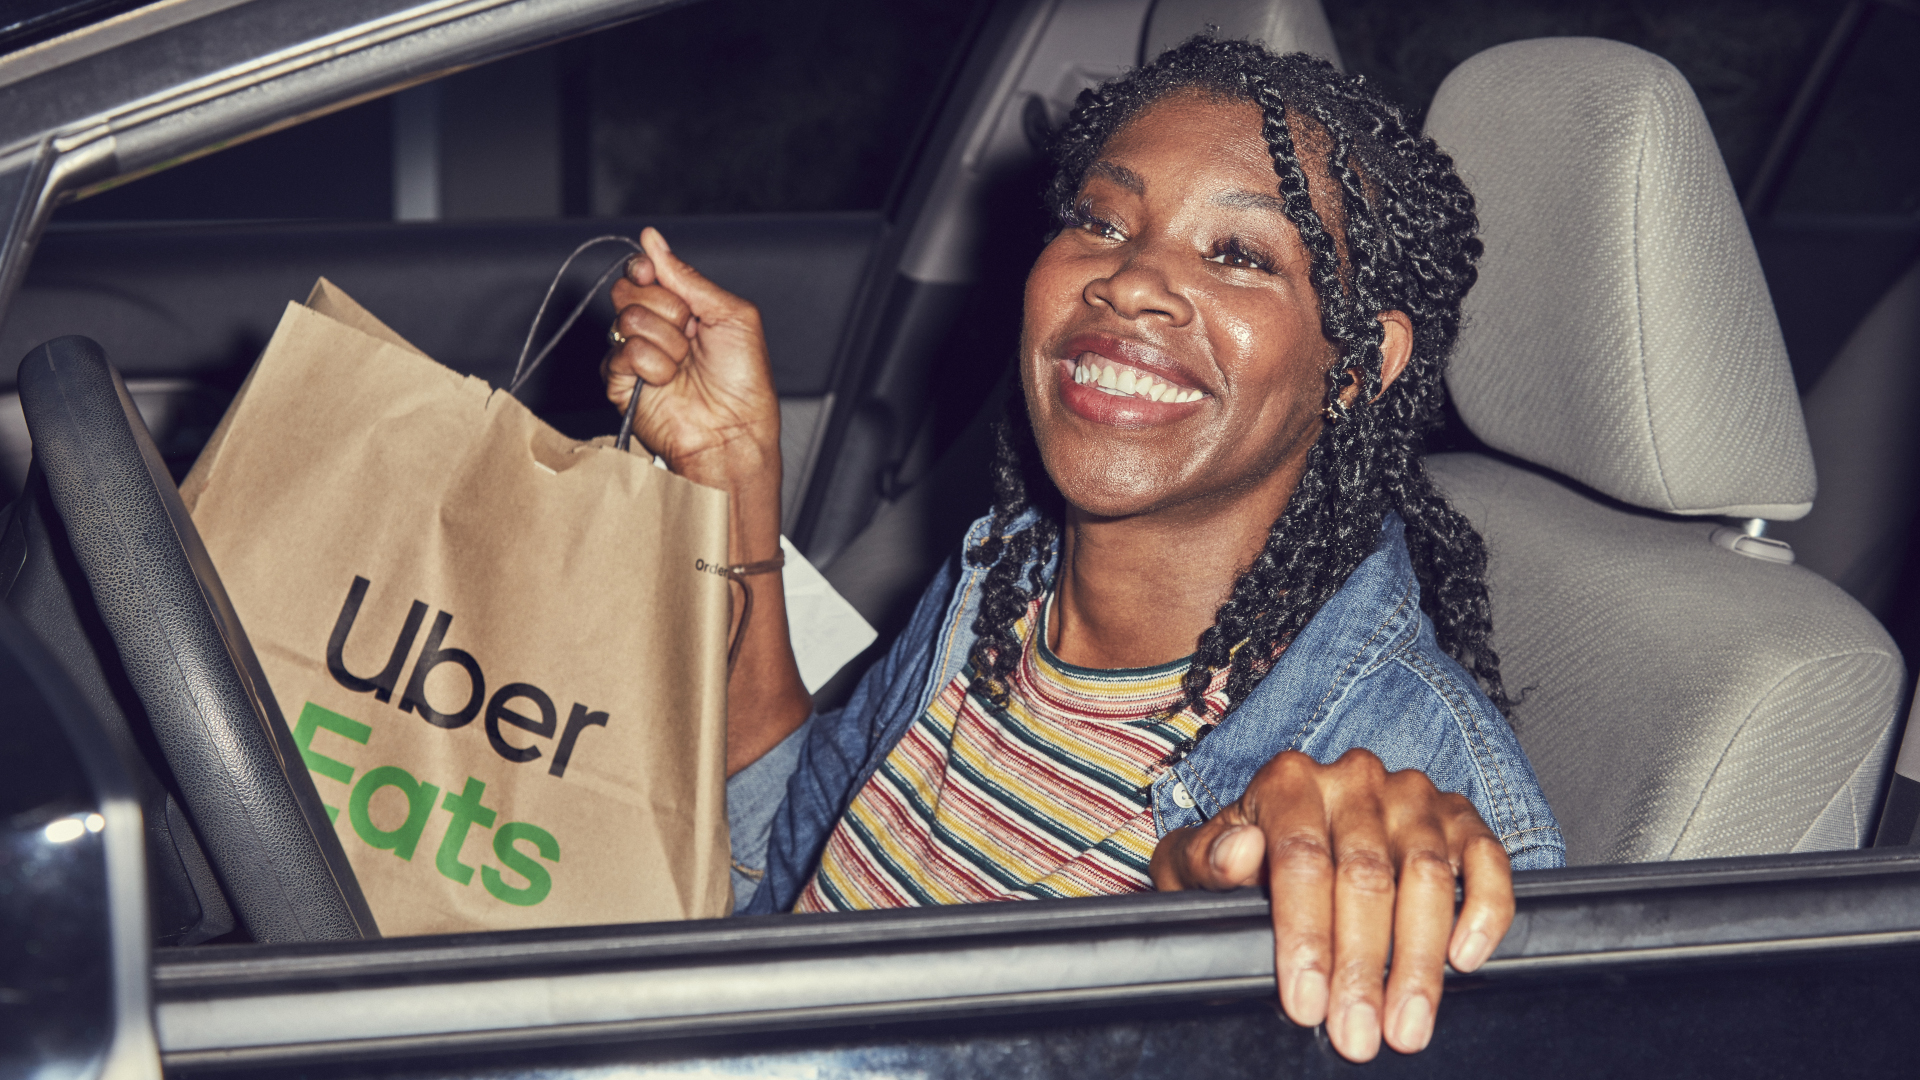 Uber rolls into online grocery delivery arena